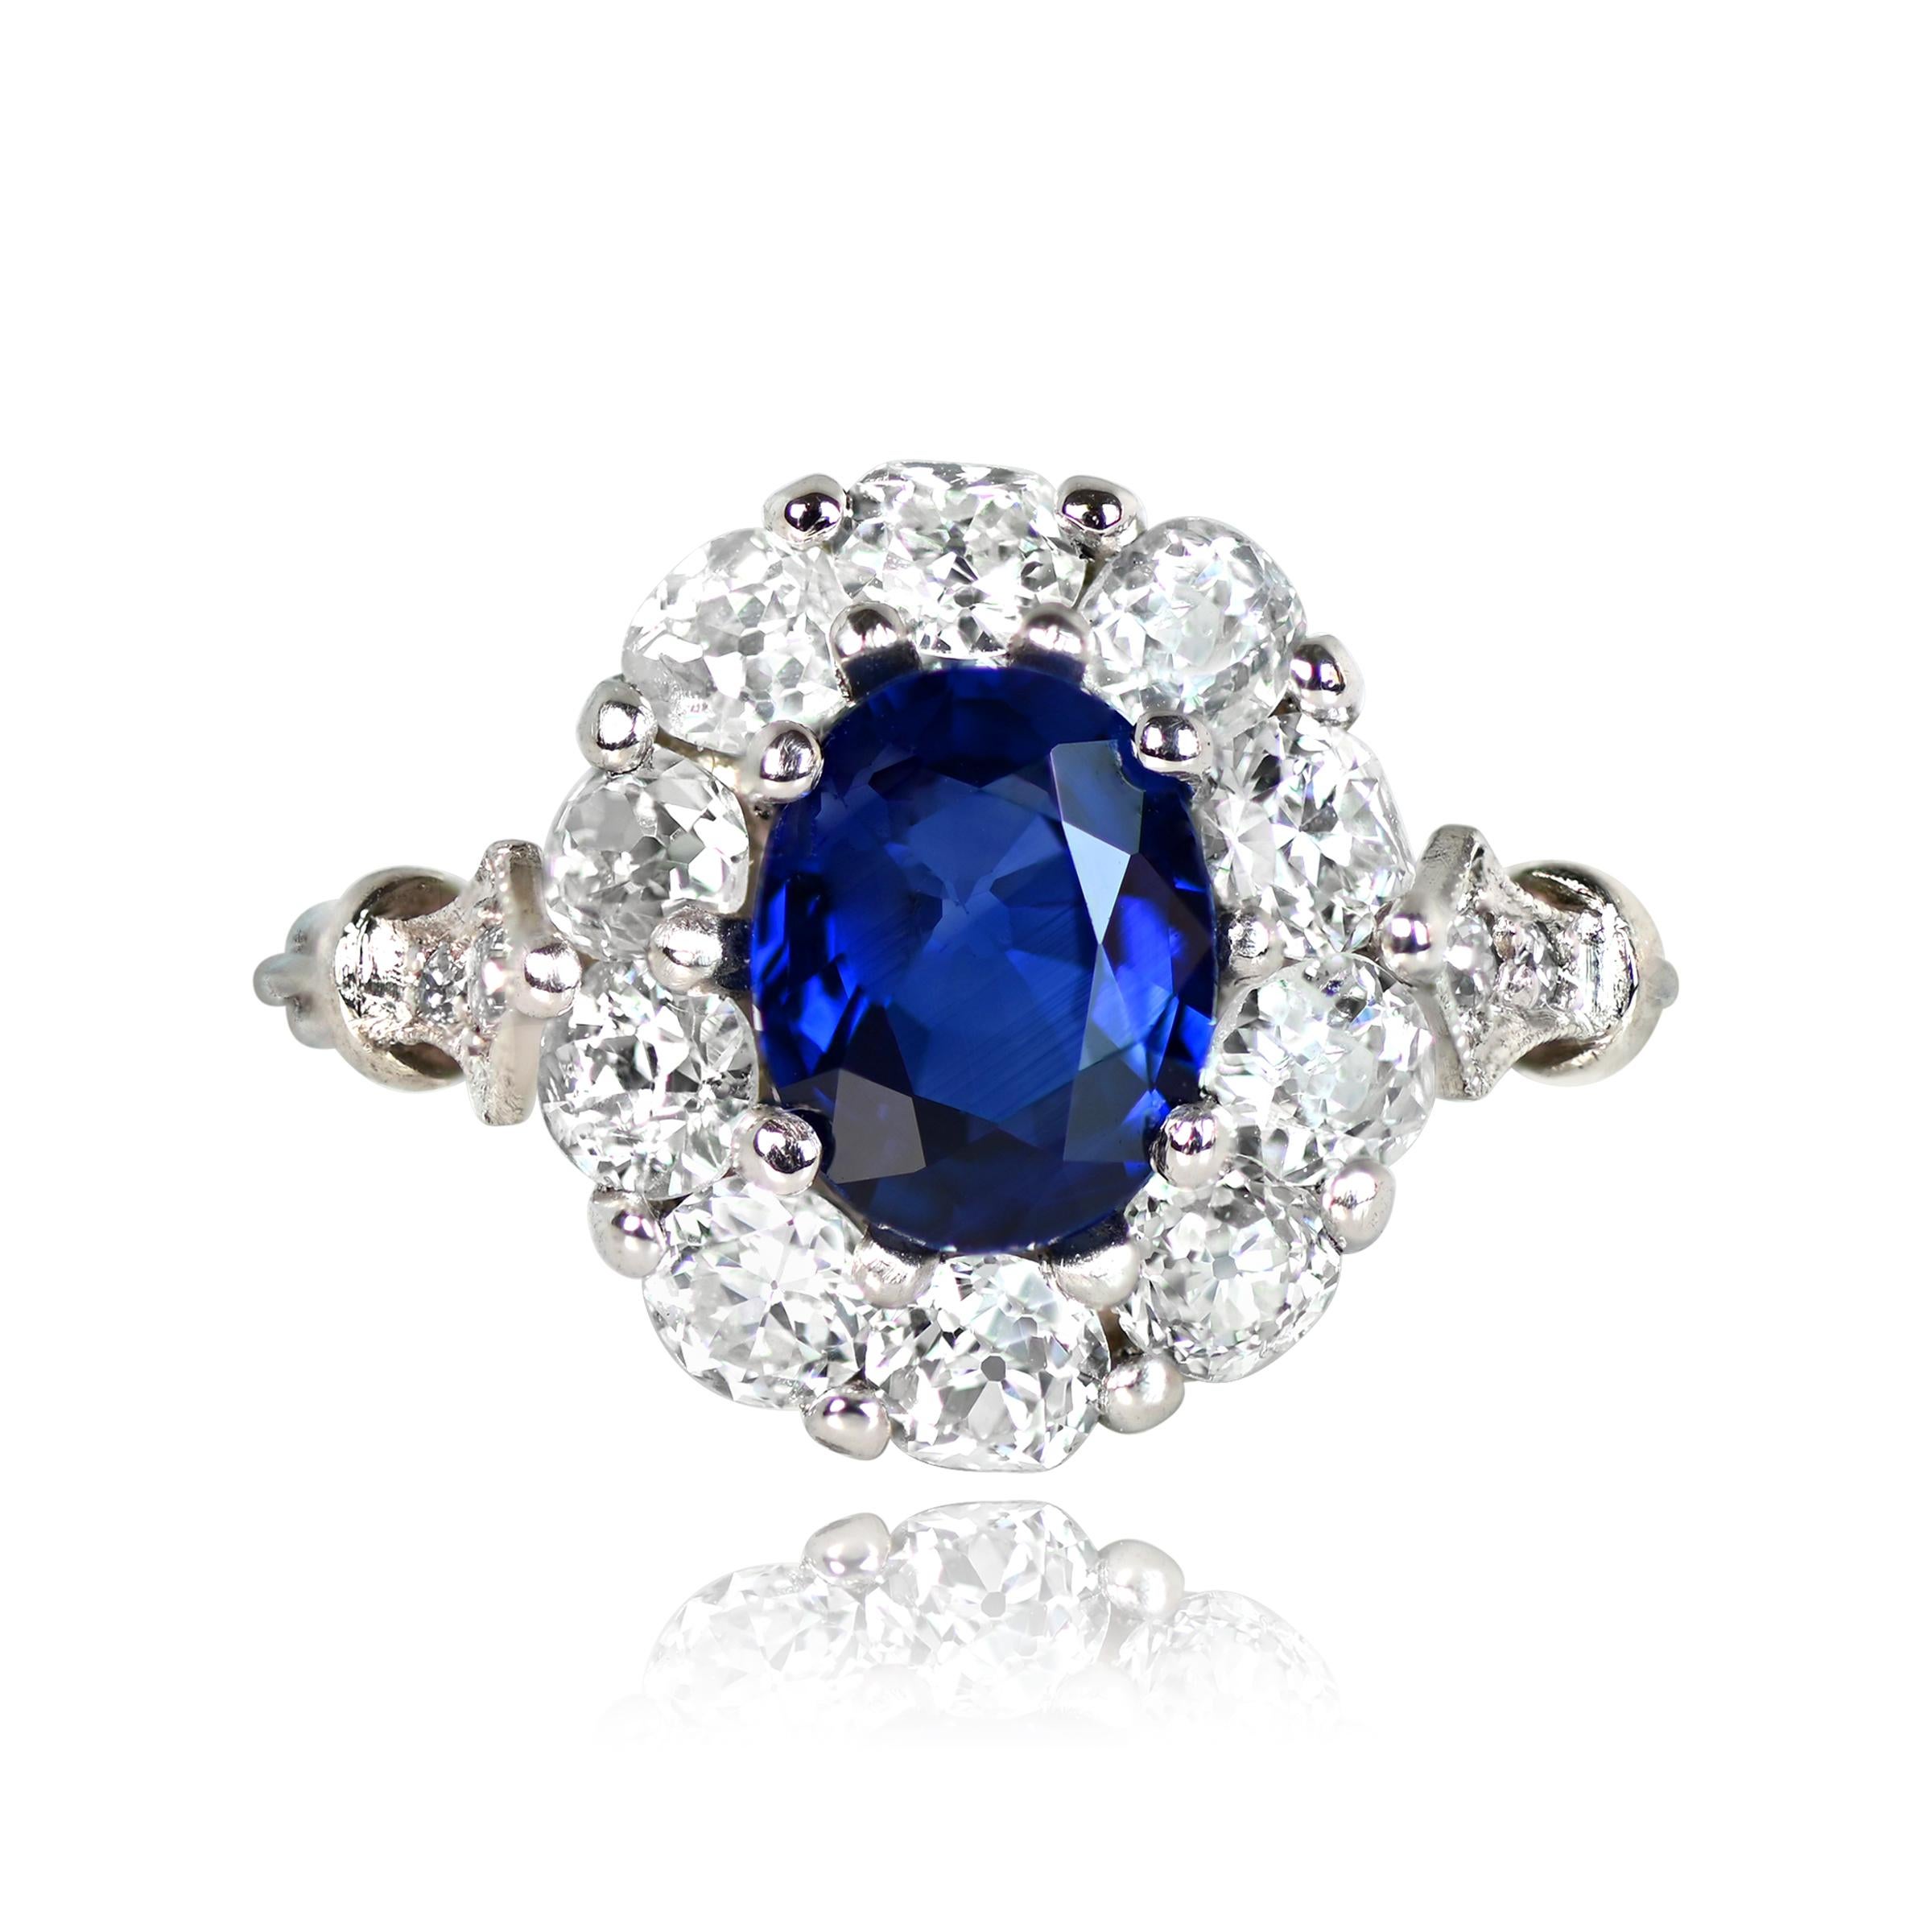 An exquisite cluster ring with a vibrant 1.66-carat natural blue oval cut sapphire at its center. The sapphire is encircled by a diamond halo in a floral arrangement. Ten old European cut diamonds, totaling around 1.00 carat, form the surrounding